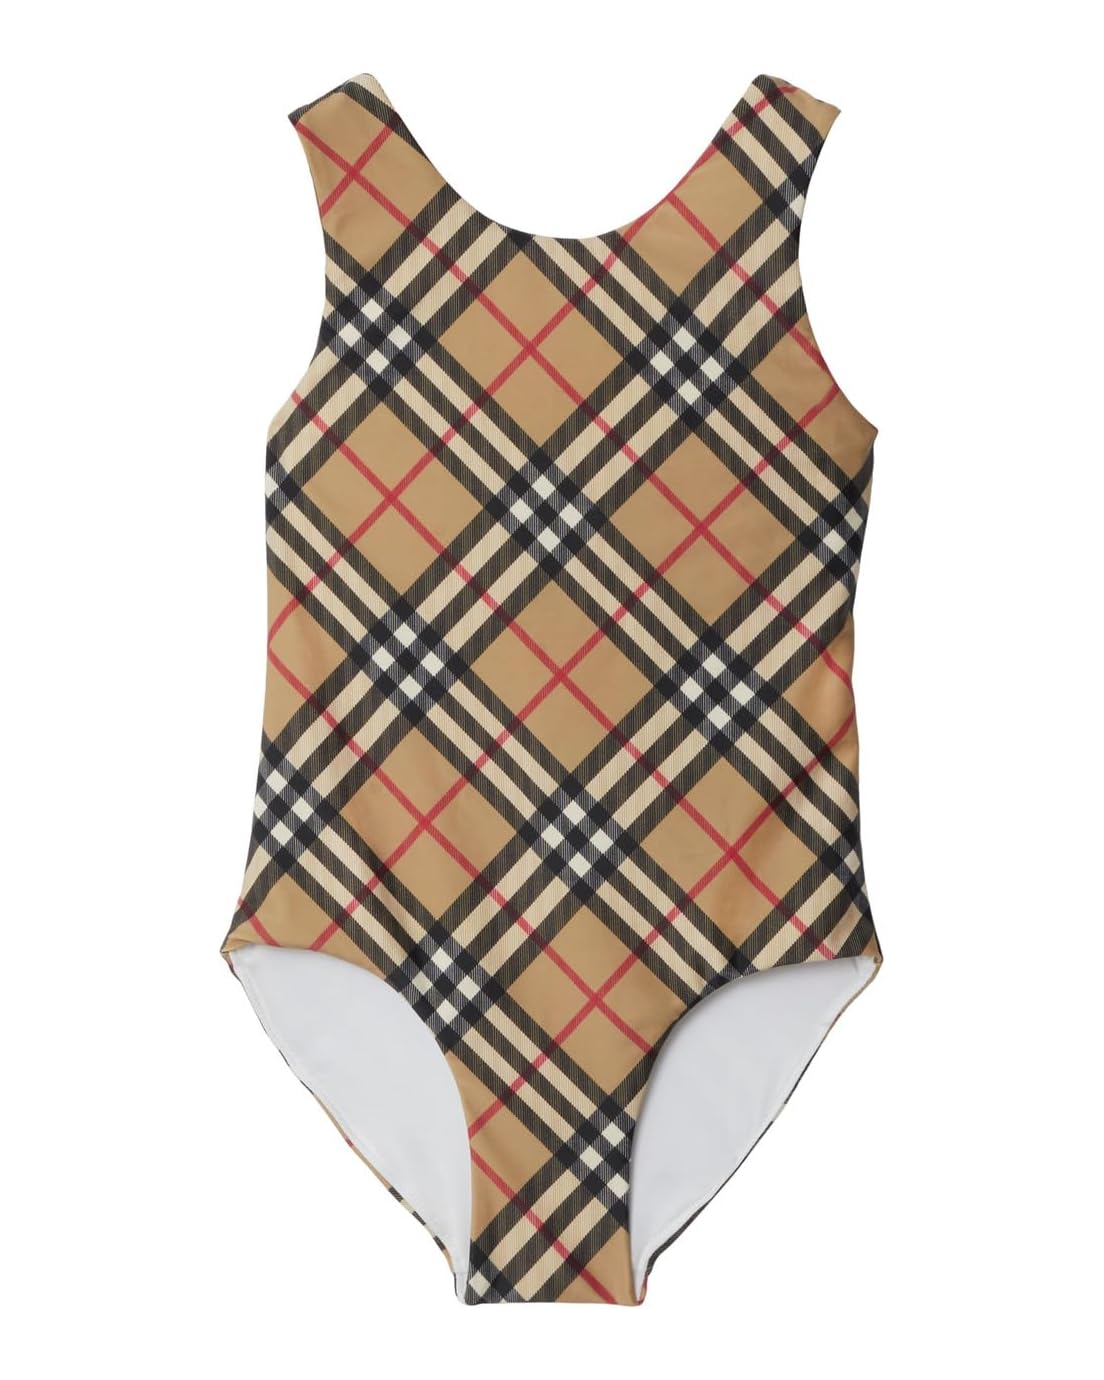 Burberry Kids Tirza Check Swimsuit (Toddler/Little Kid/Big Kid)